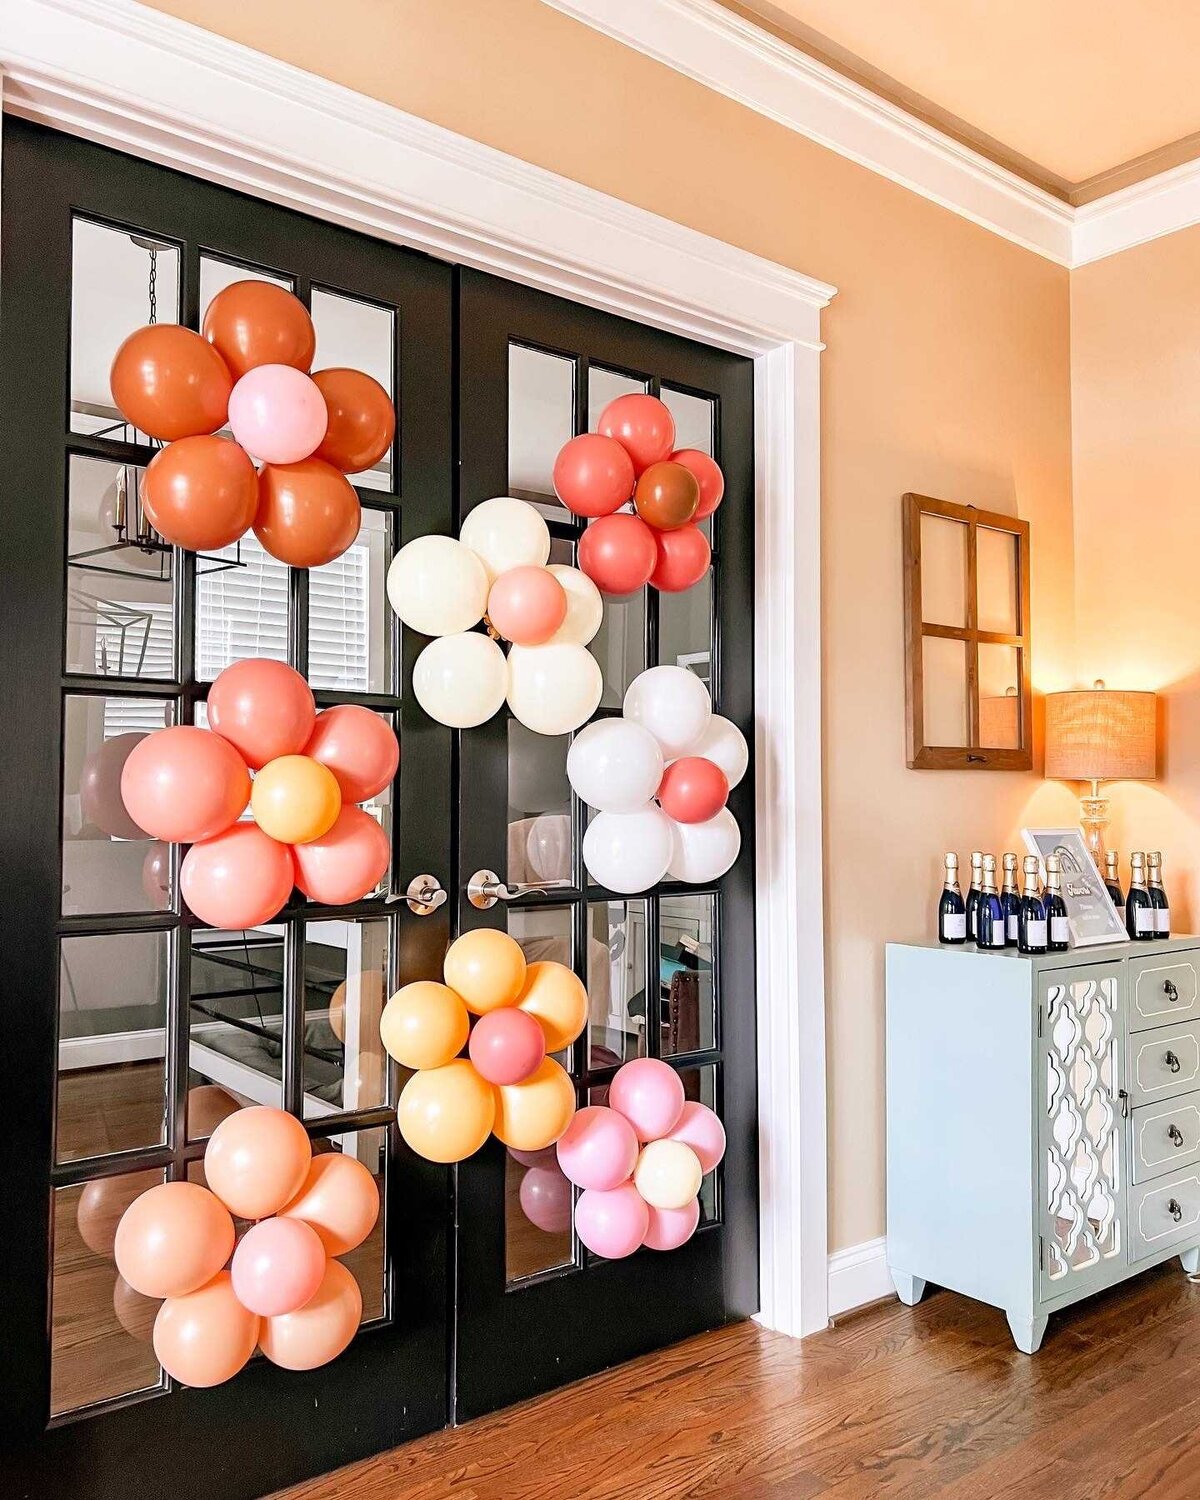 Flower balloons for birthday party